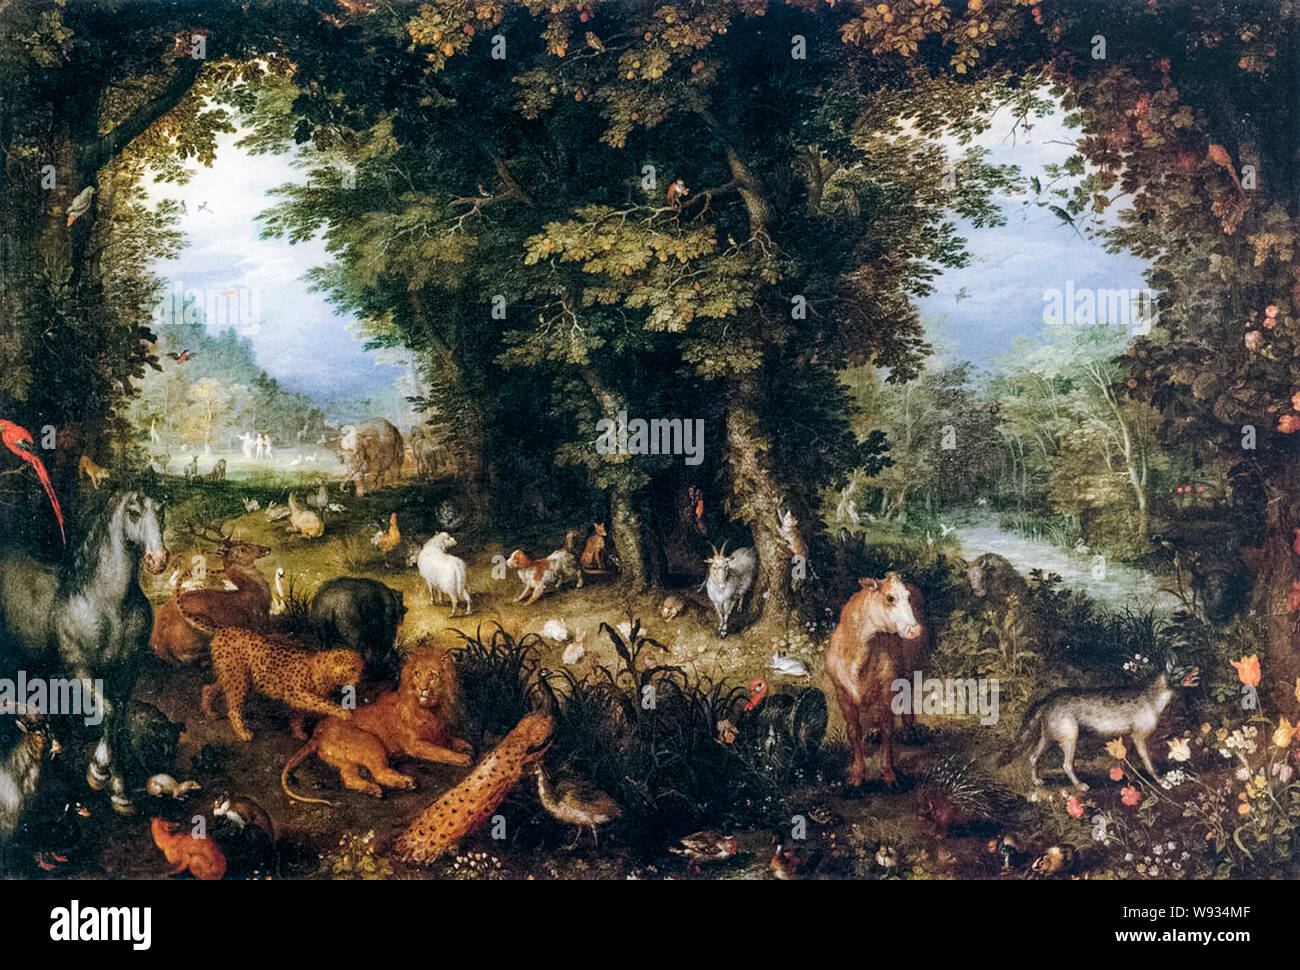 Jan Brueghel the Elder, Earth or The Earthly Paradise, painting, 1607-1608 Stock Photo